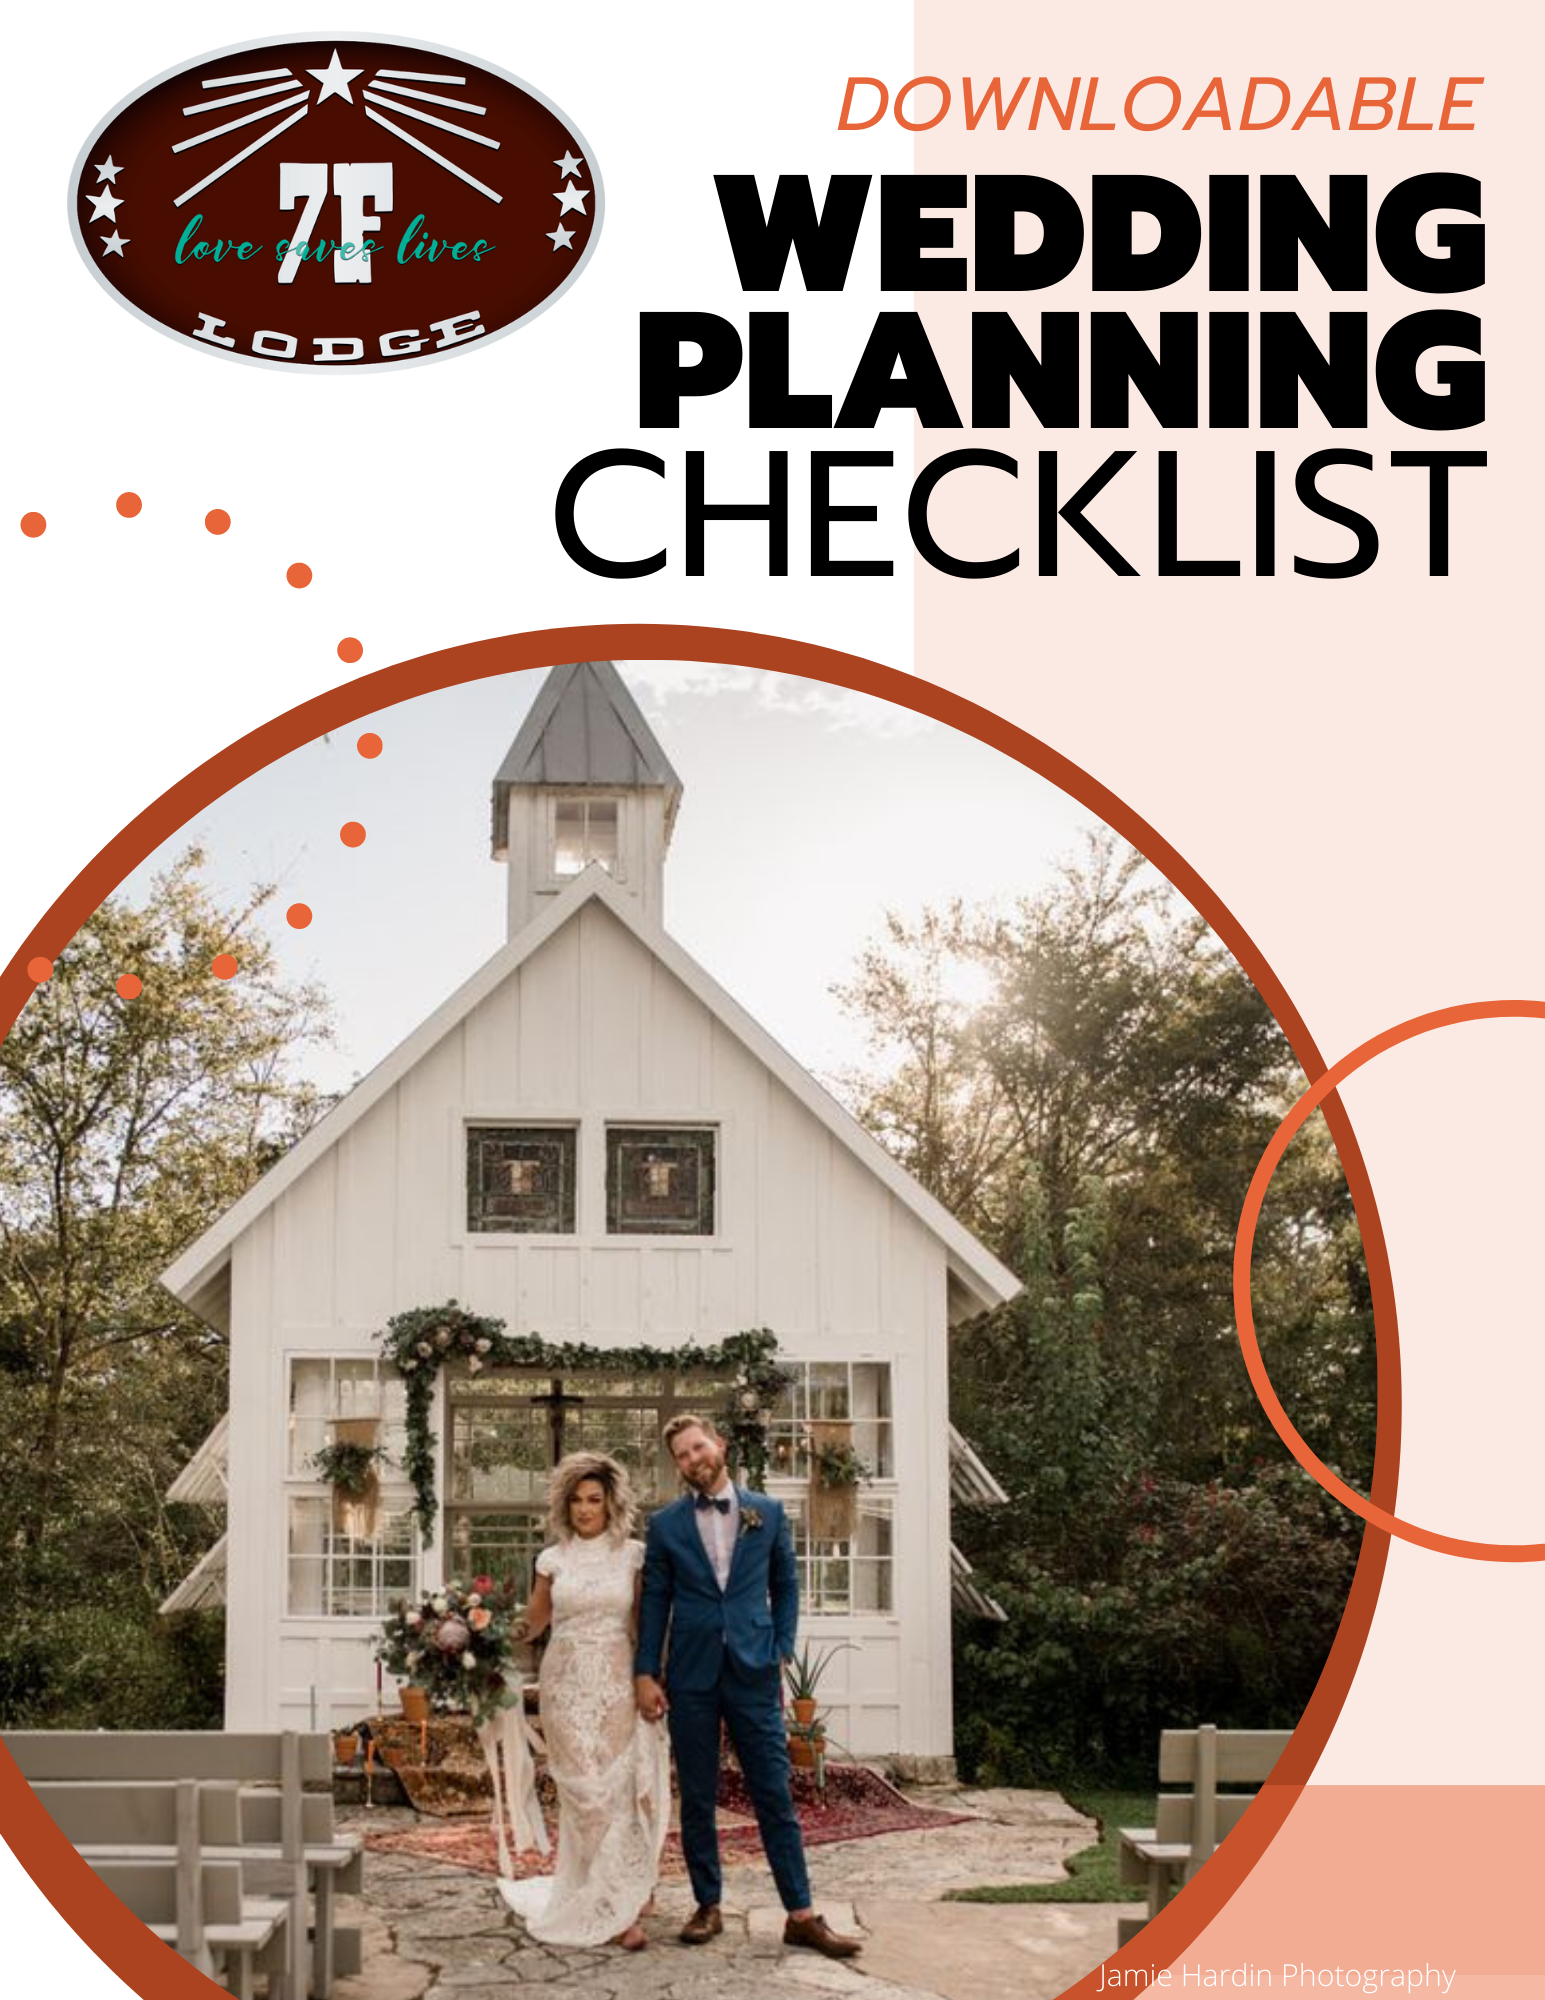 Cover of the Free Wedding Planning checklist with circular graphics in hues of pink and red and an image of a bride and groom in front of the 7F Chapel and the 7F Logo in the top left corner